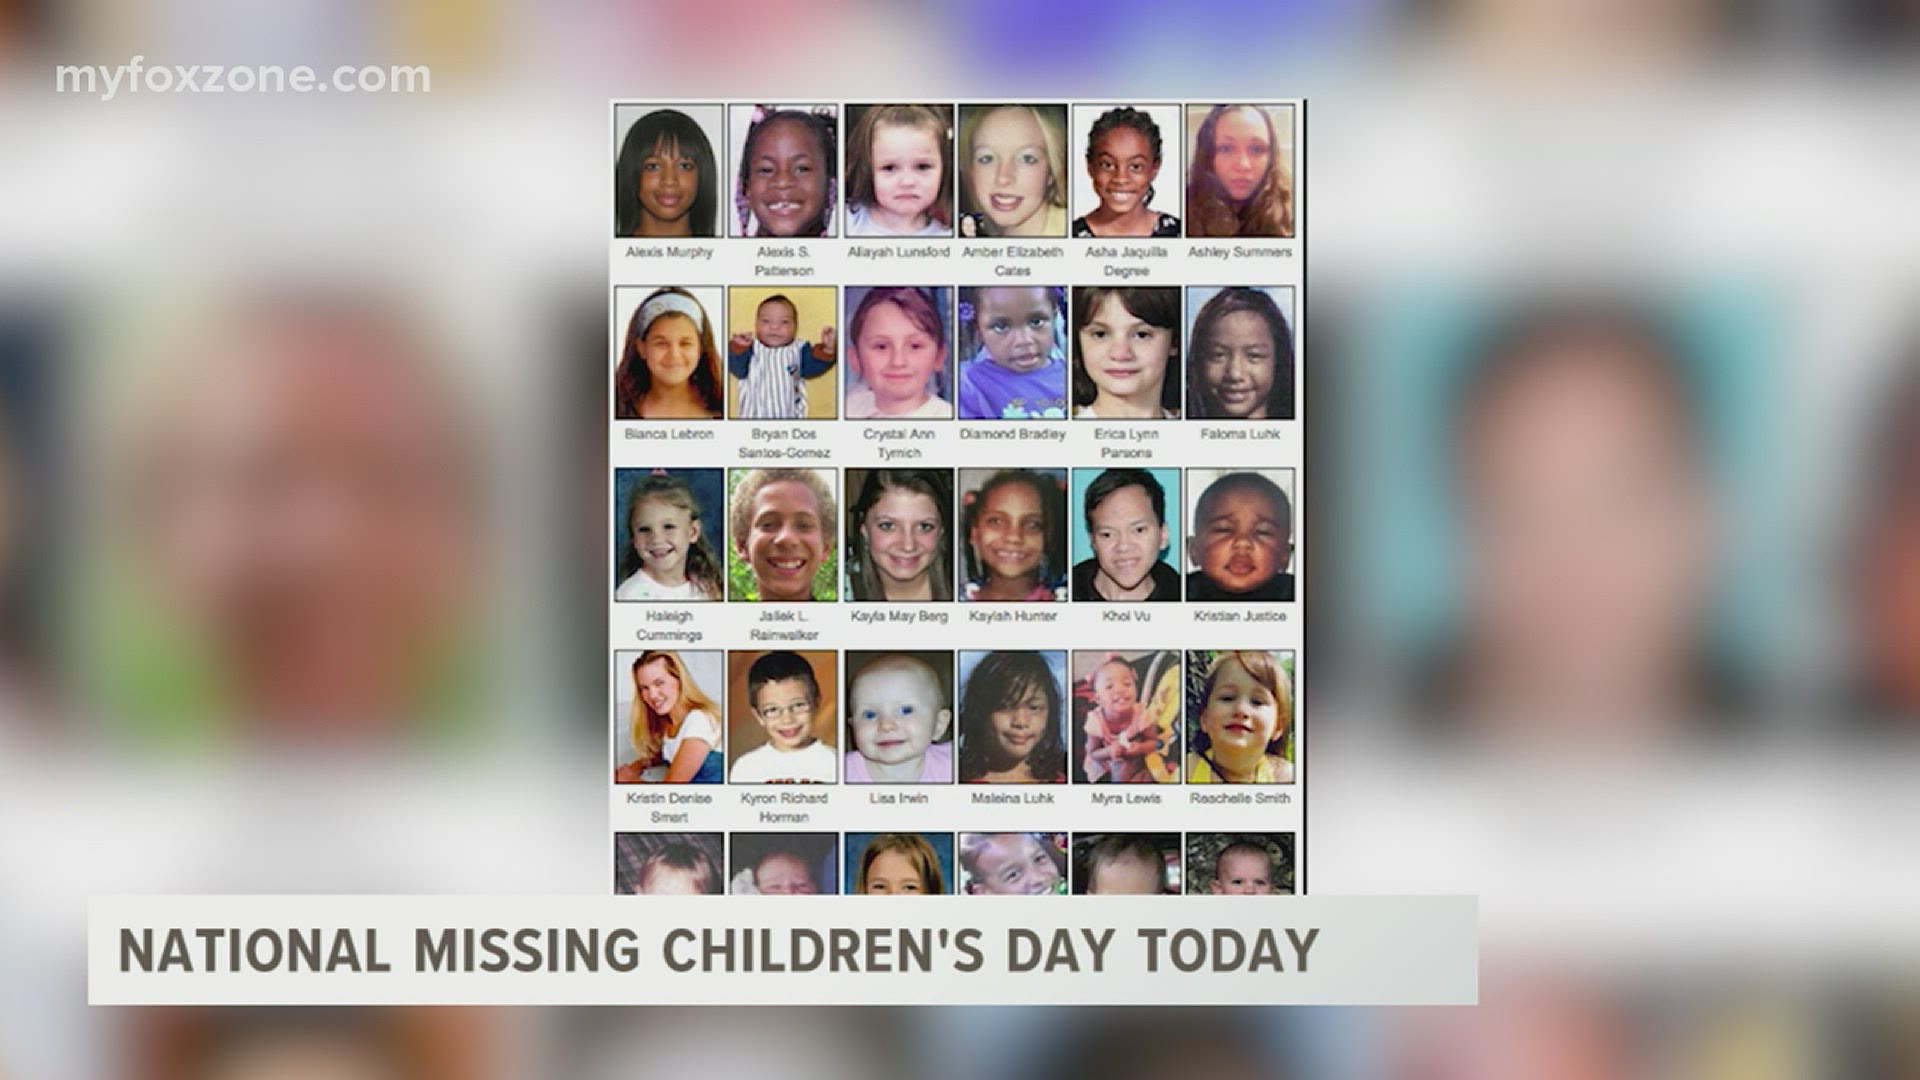 With thousands of children going missing every year, this day serves as a spotlight on the importance of child safety.